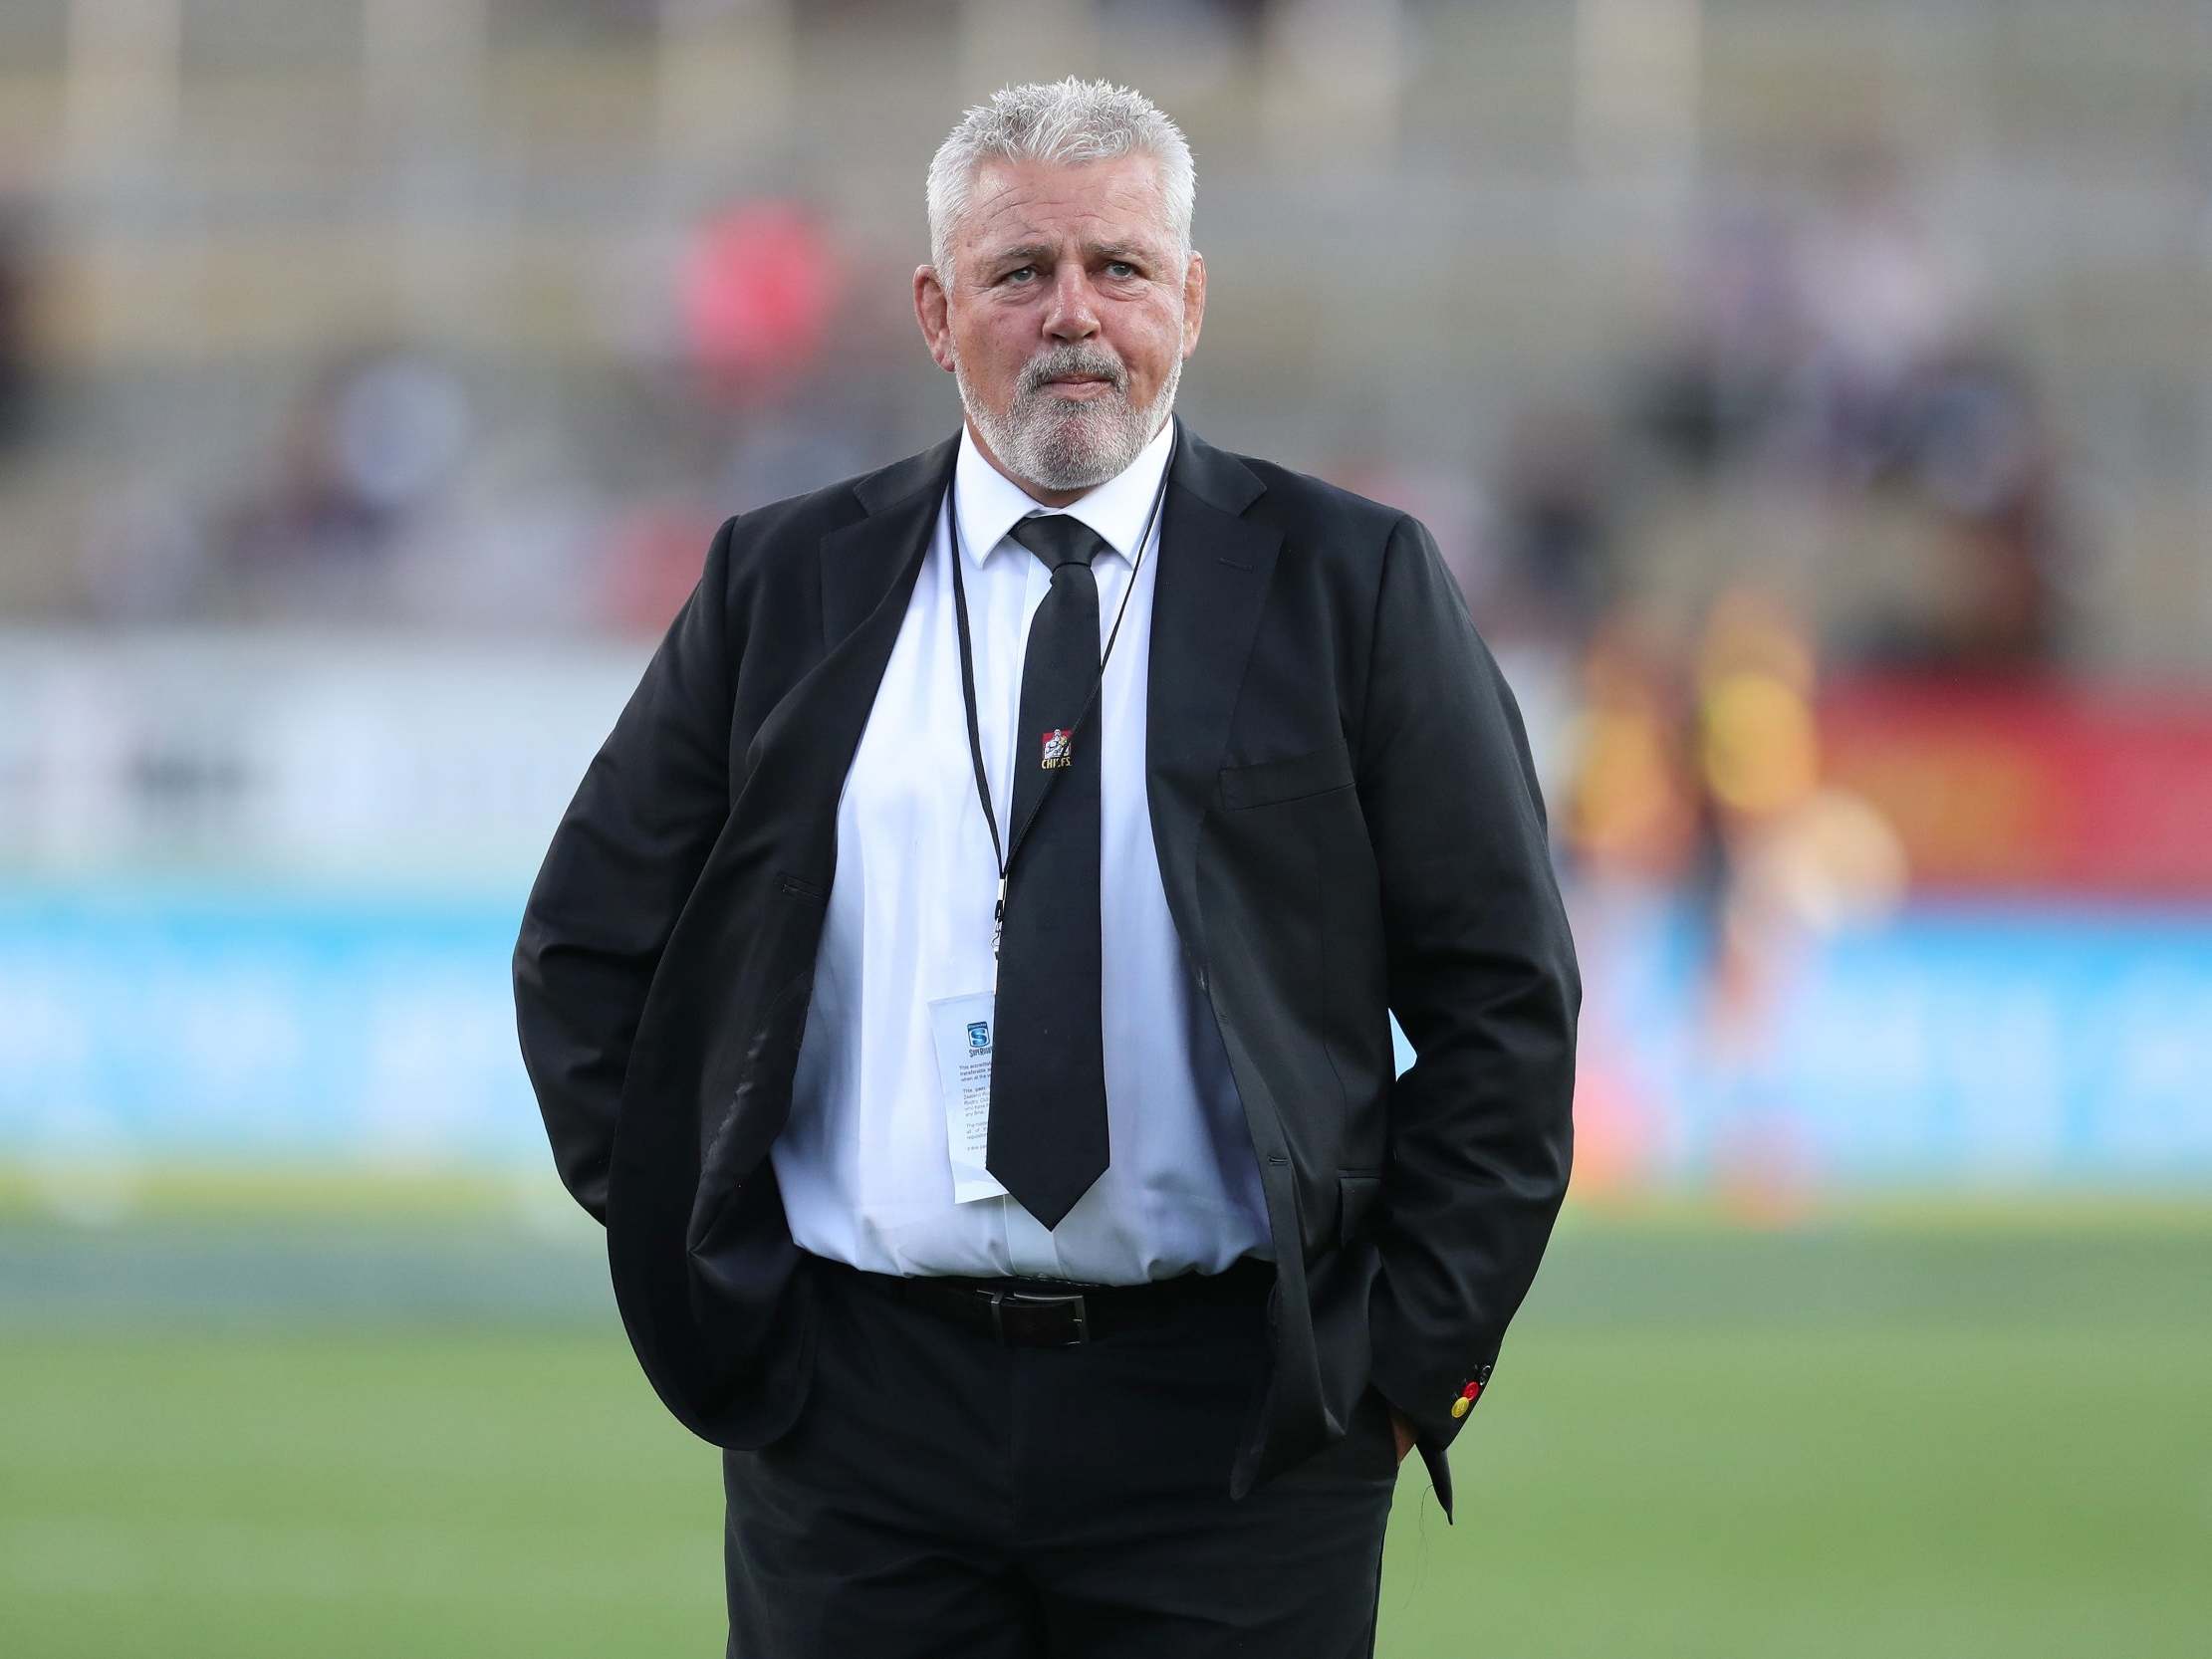 Warren Gatland would be open to a 'decider' between his Lions team and the All Blacks